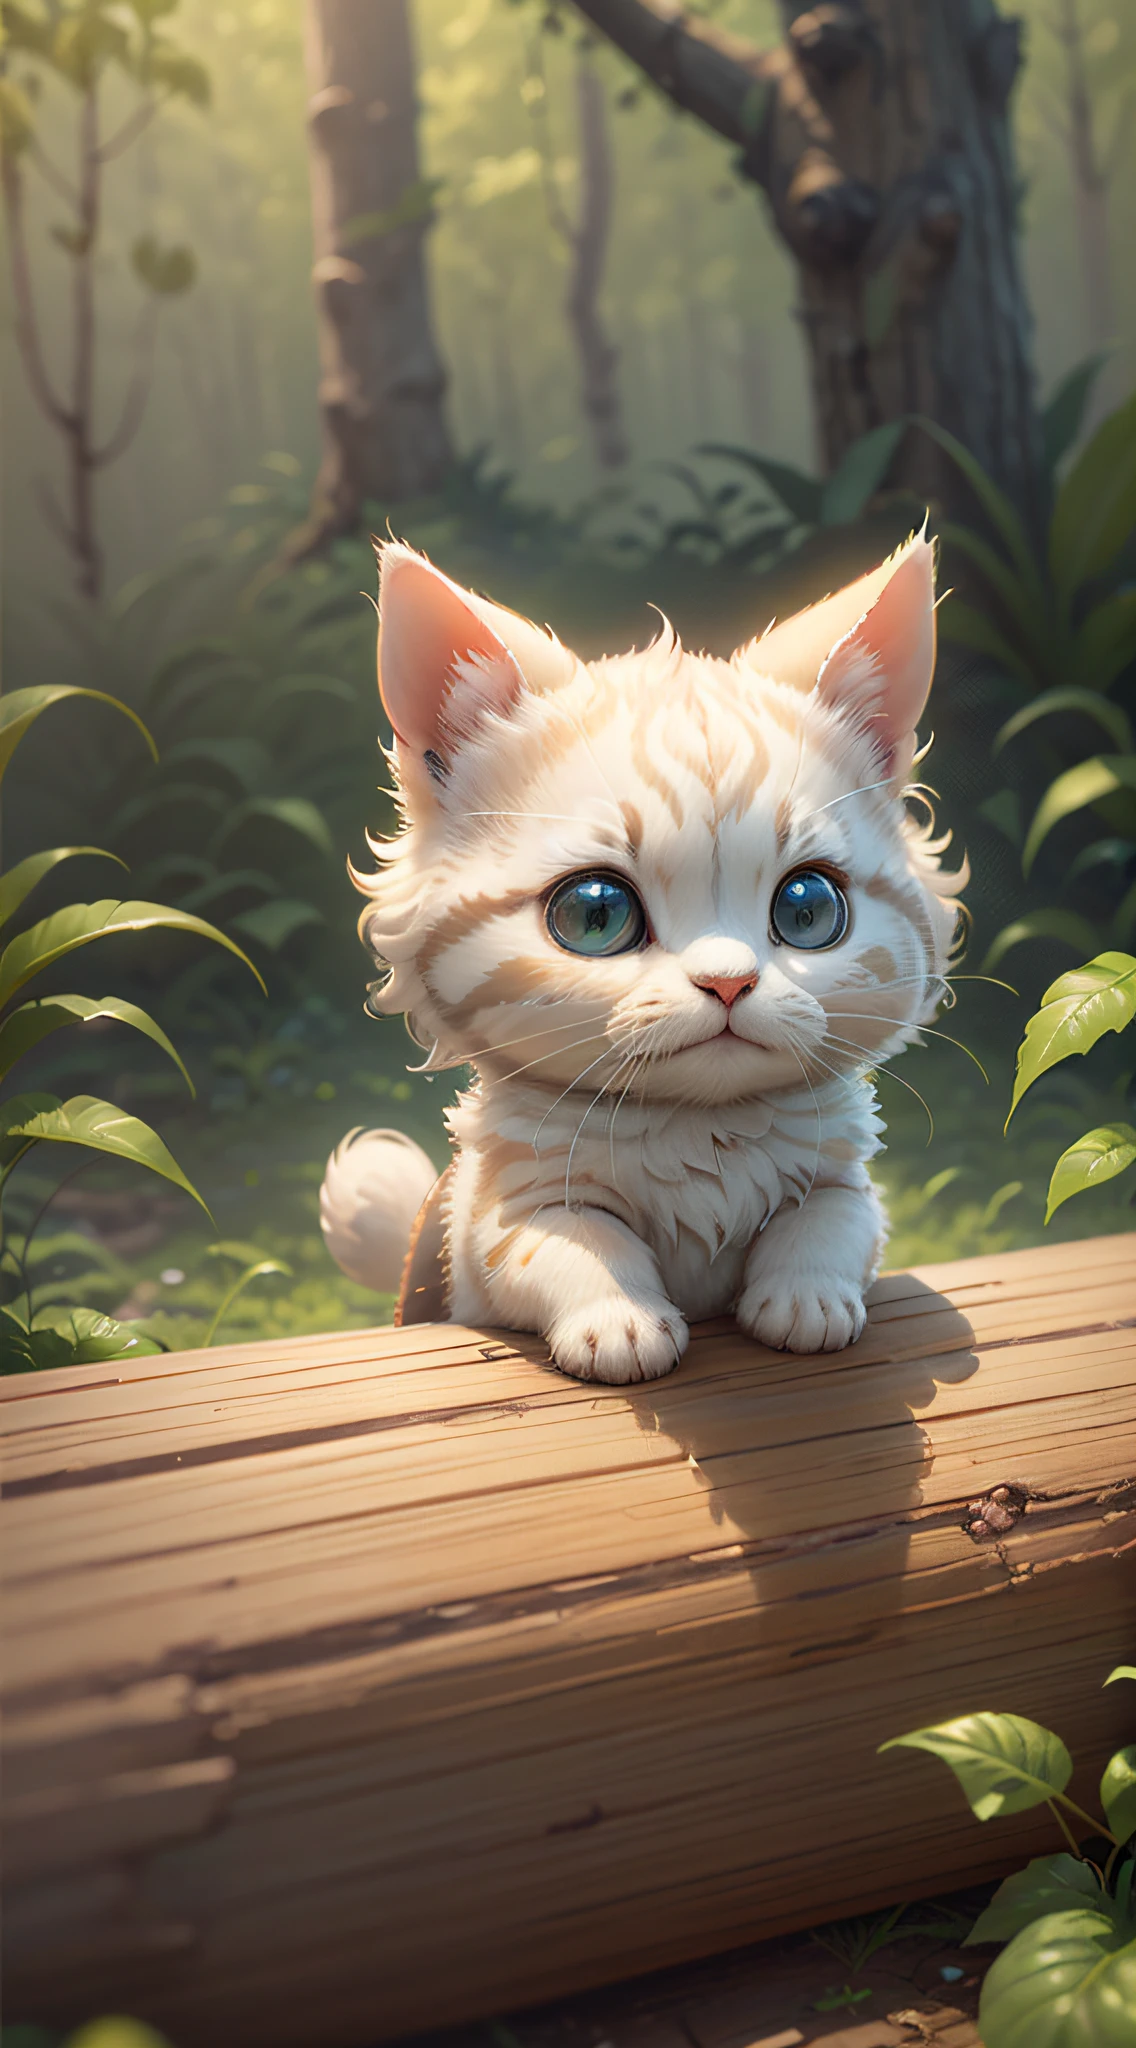 There is a little white cat sitting on a log with a camera, one eye to take pictures, cute digital art, cute digital painting, cute detailed digital art, cute 3 D rendering, cute cartoon characters, cute anthropomorphic rabbit, cute cartoon, cute detailed artwork, cute cute art, cute cute photos, cute animals, cute cute characters, cute creatures